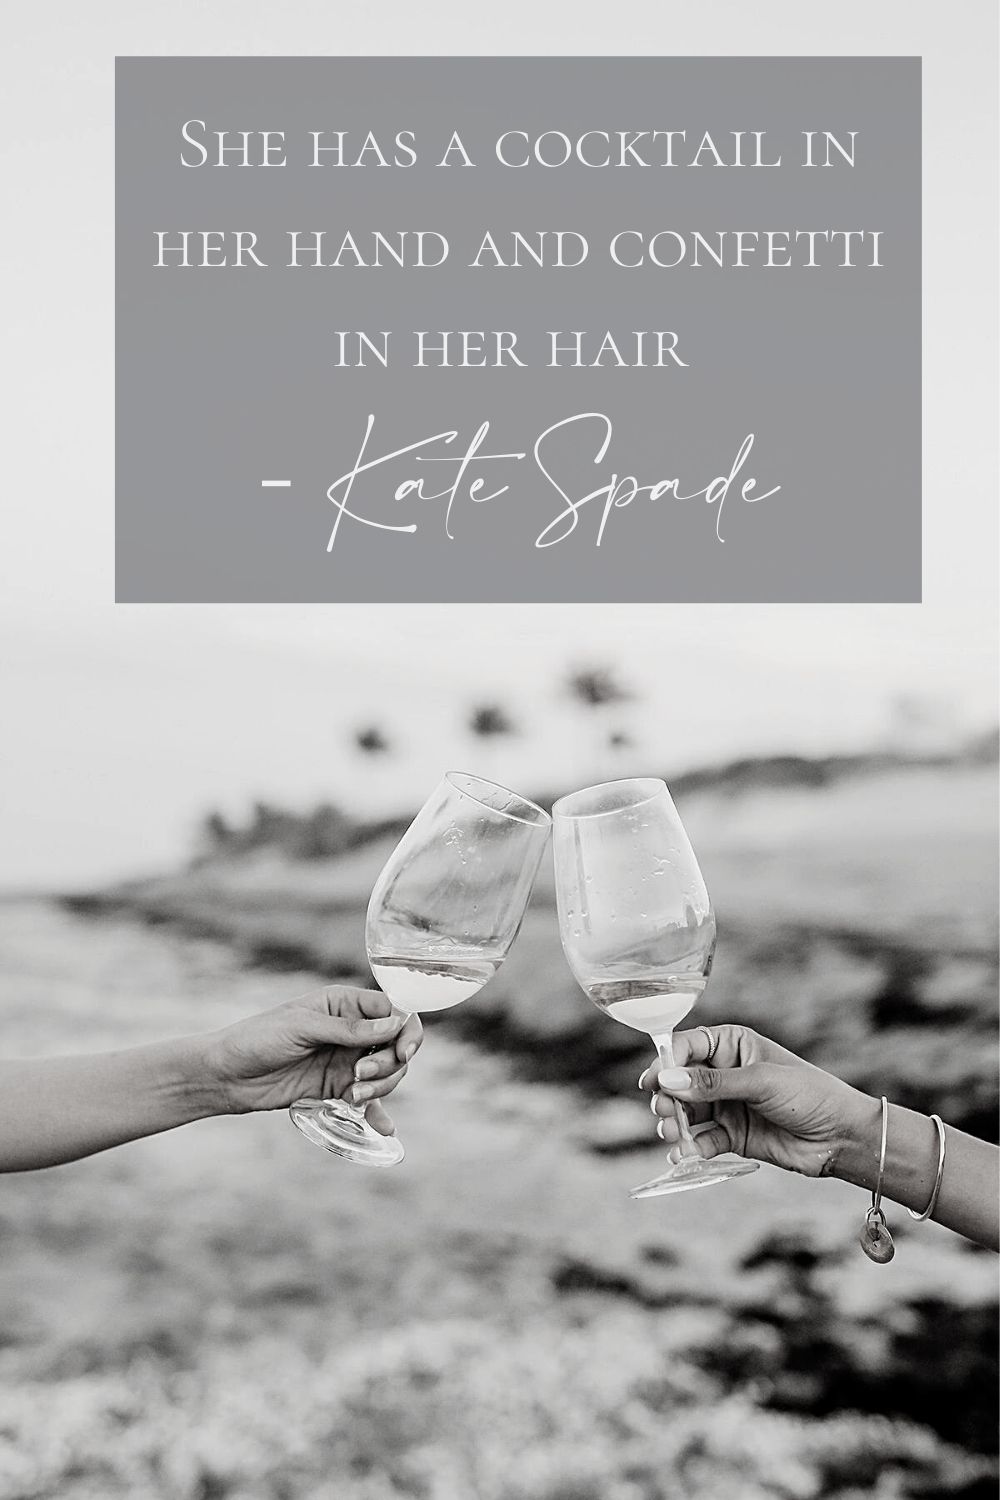 She Has a Cocktail in Her Hand and Confetti in Her Hair- Kate Spade - Friday Cocktails